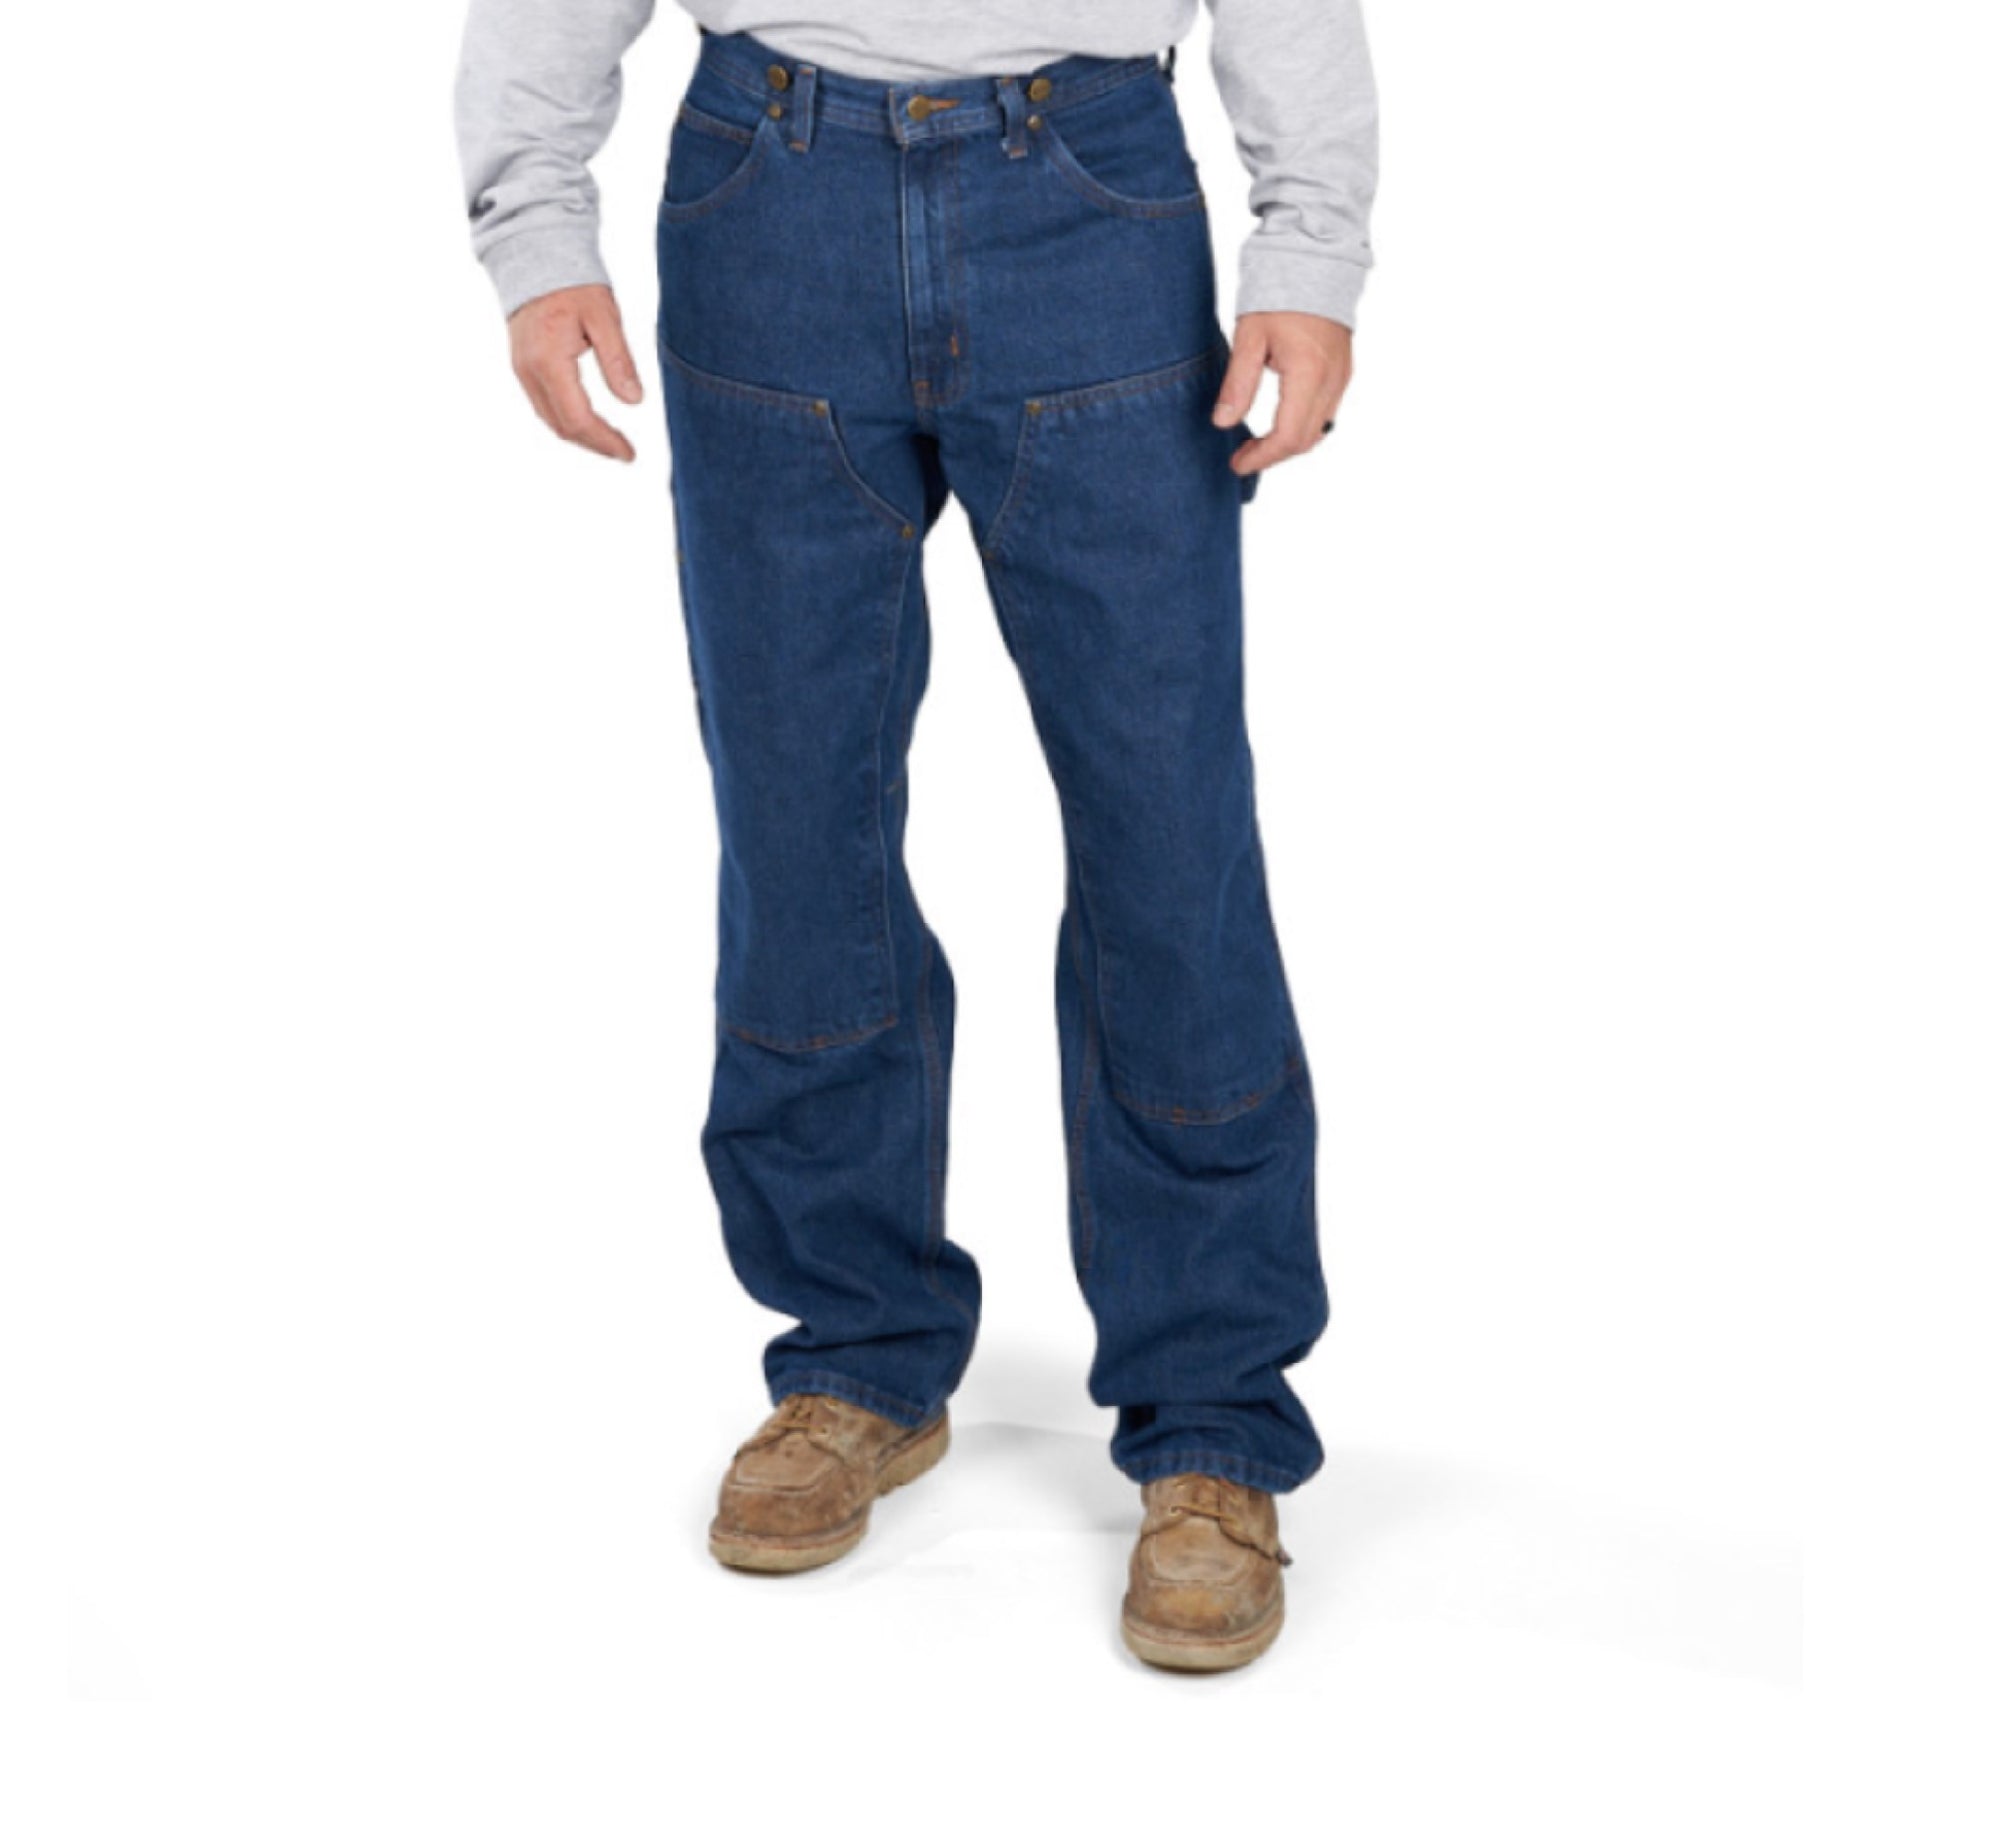 Carhartt Loose Fit Utility Jeans, Men's Canal